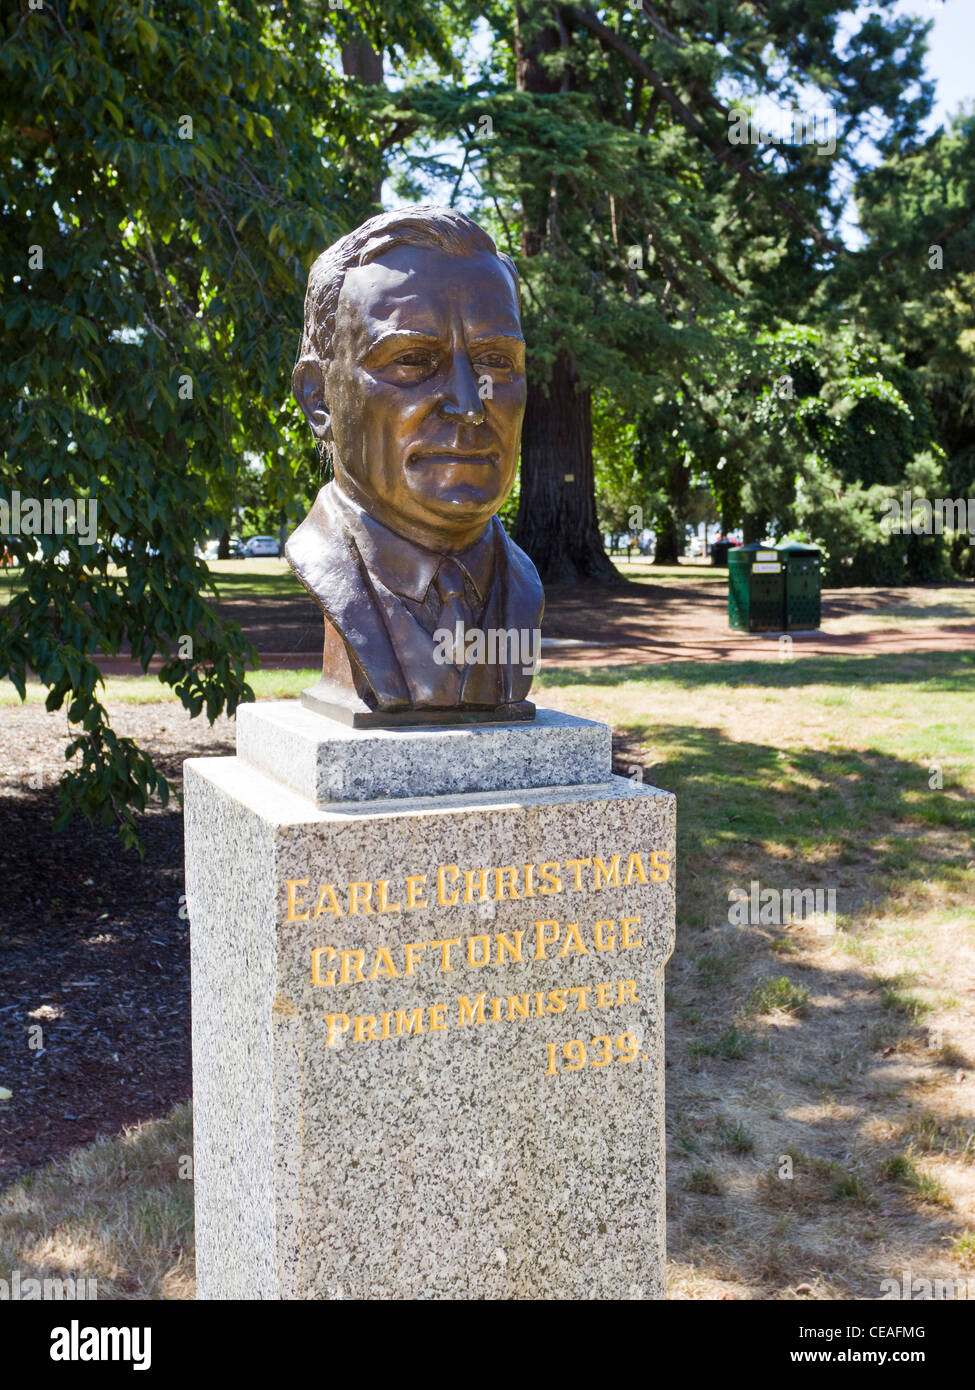 Bust of Prime Minister Earle Christmas Craft Page in the Ballarat Botanical Gardens. Stock Photo